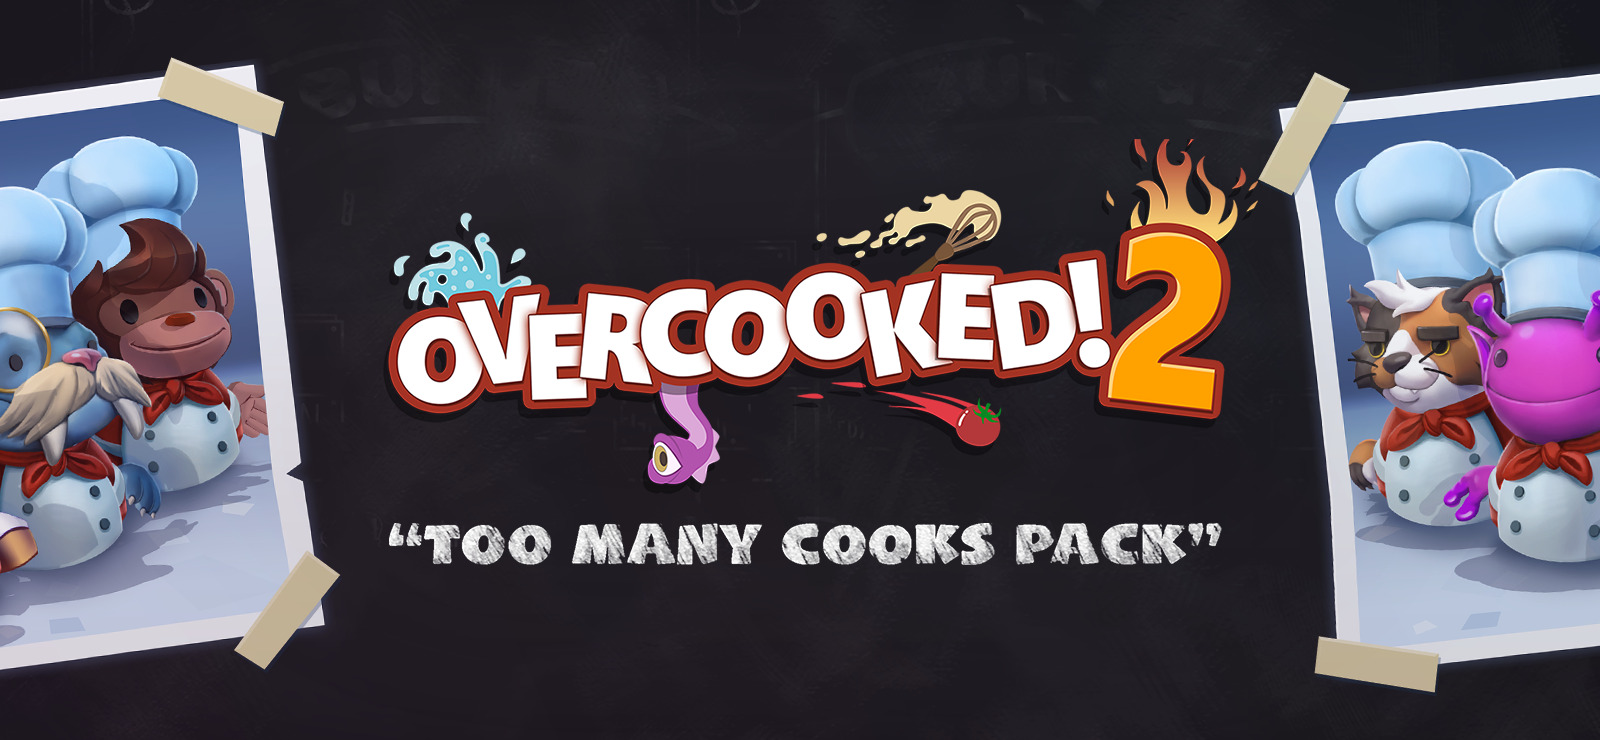 Overcooked 2 - too many cooks pack download torrent